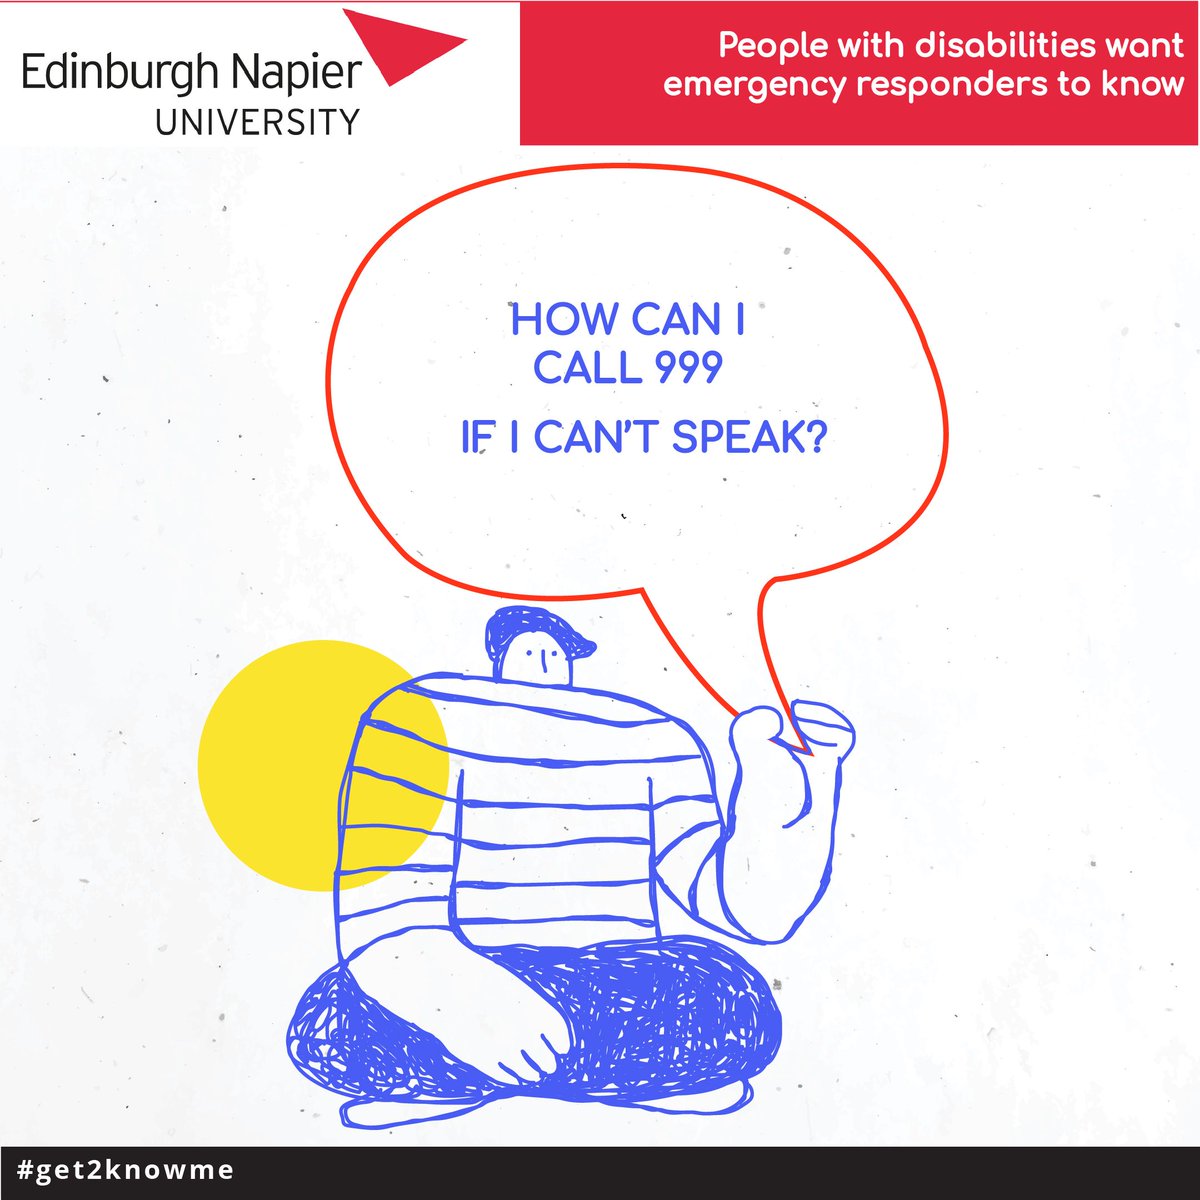 ❗ Scottish Learning Disability Week runs from May 6-10 and the theme this year is #digitalinclusion 🚨 @EdinburghNapier researchers have launched a campaign #Get2KnowMe on Emergency Care for ppl w/ Learning Disabilities to create awareness of how to improve emergency services